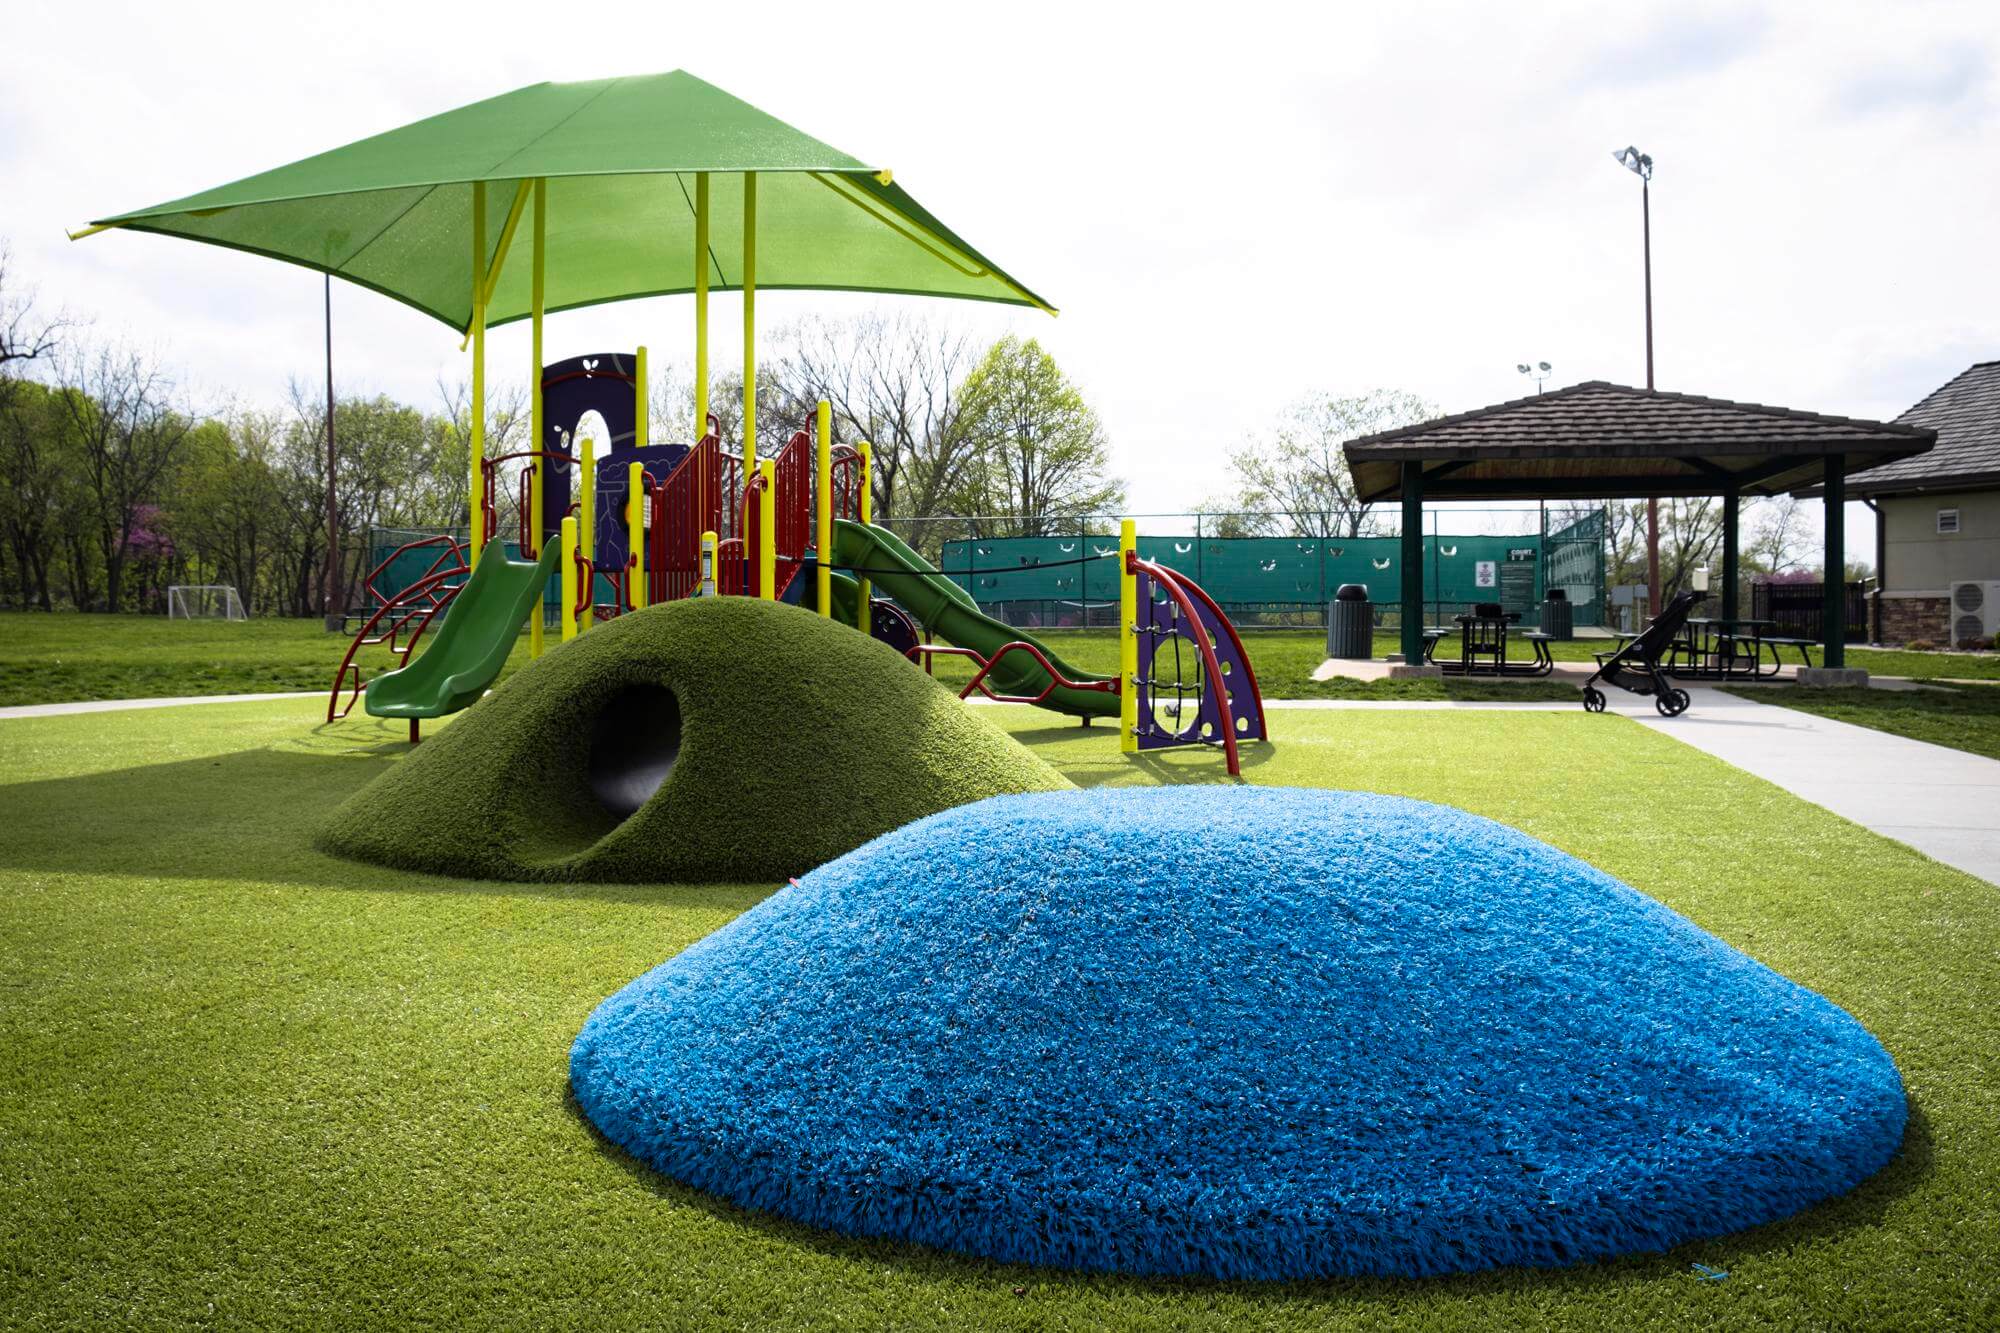 Playground with synthetic grass and a blue play mound.